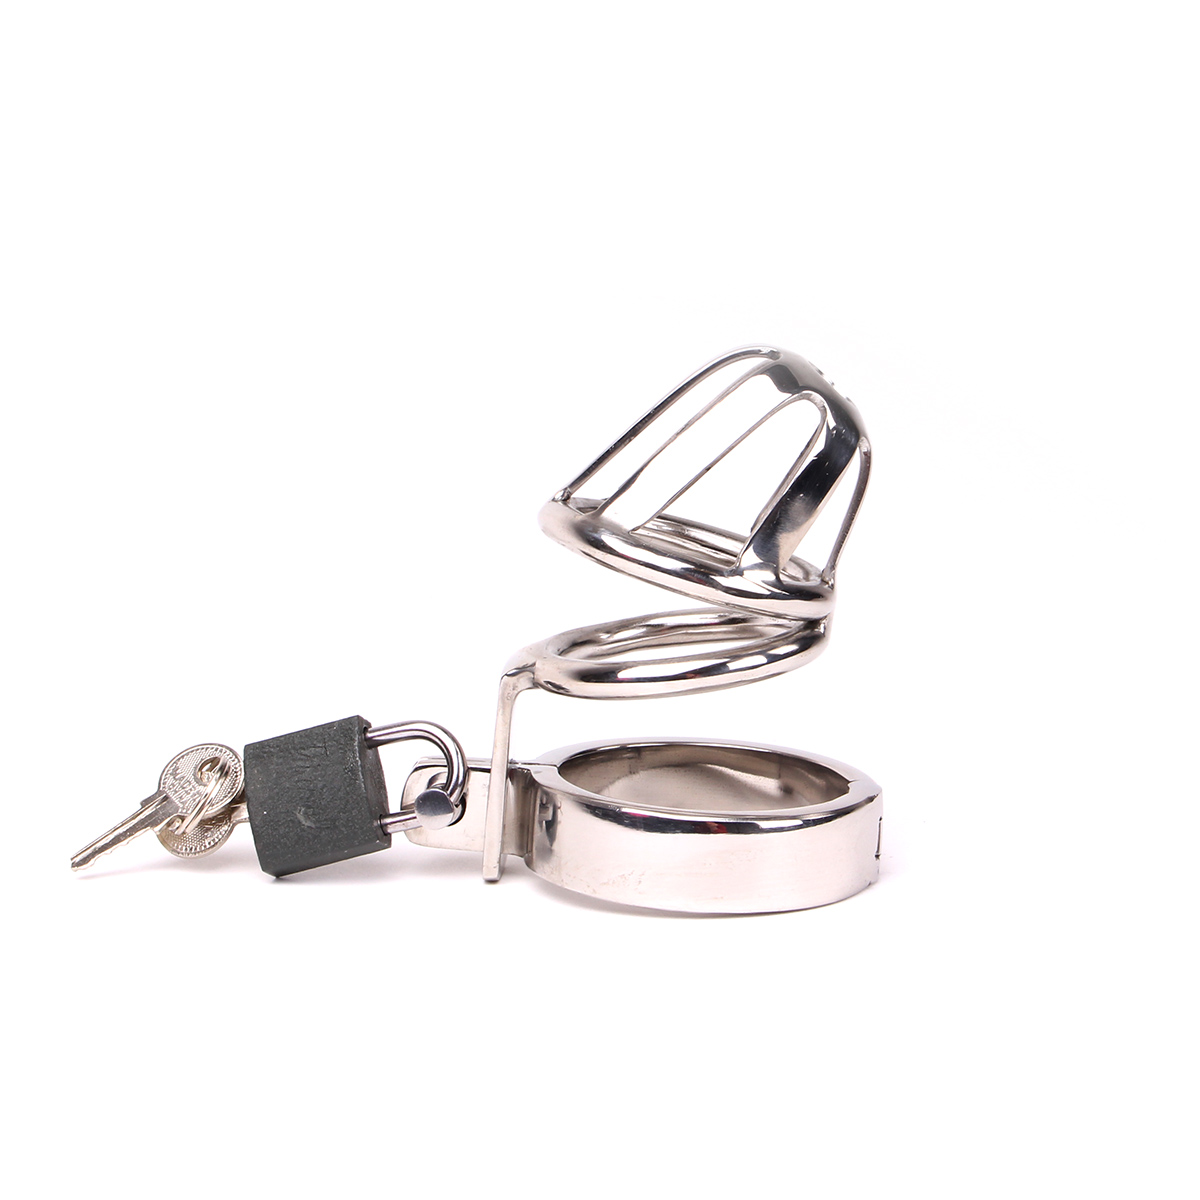 Chastity-Cage-Small-Steel-OPR-277030-4